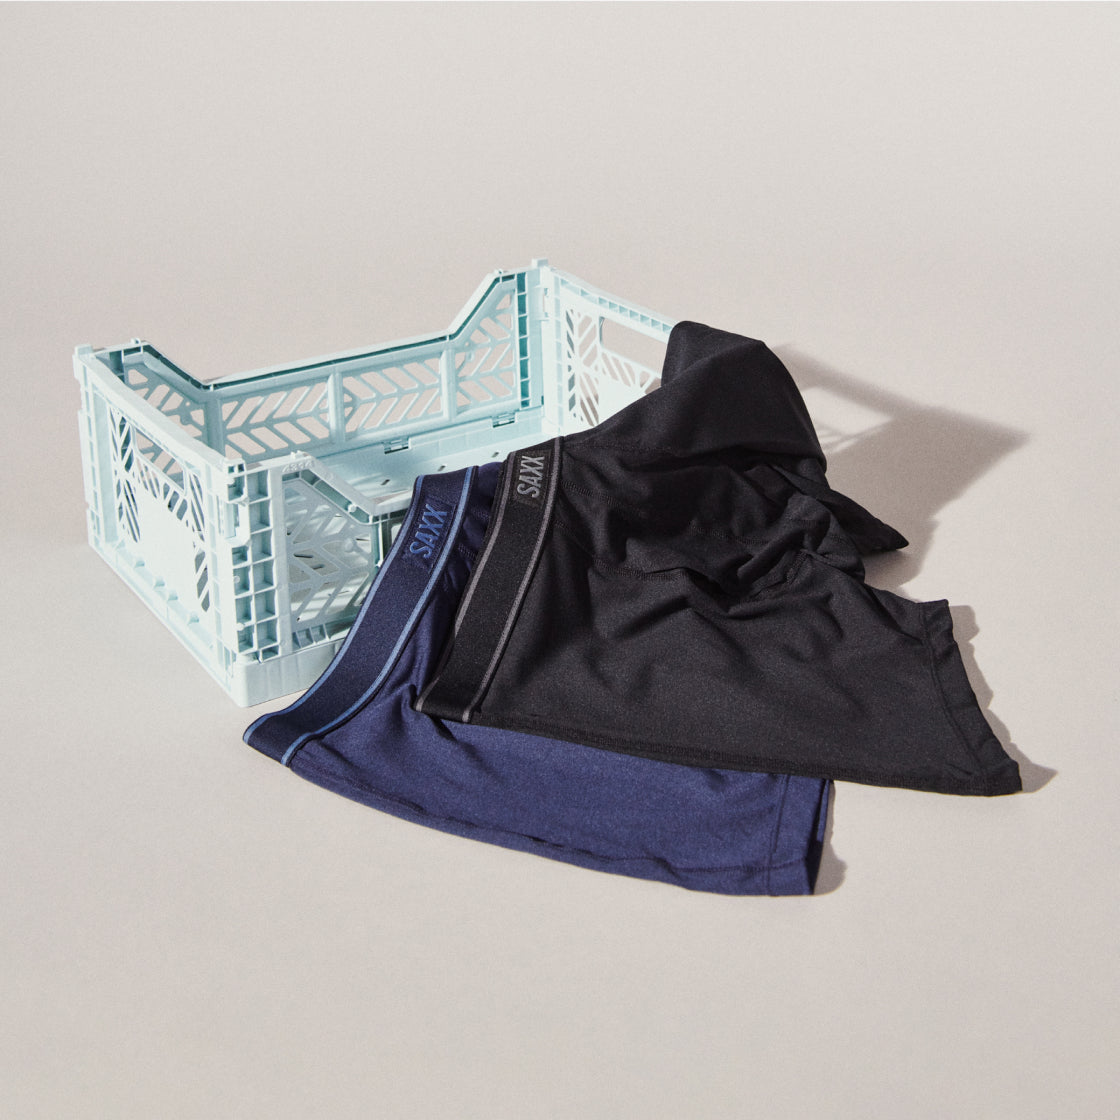 Two pairs of SAXX boxer briefs laid out over the edge of a milk crate on a white backdrop.